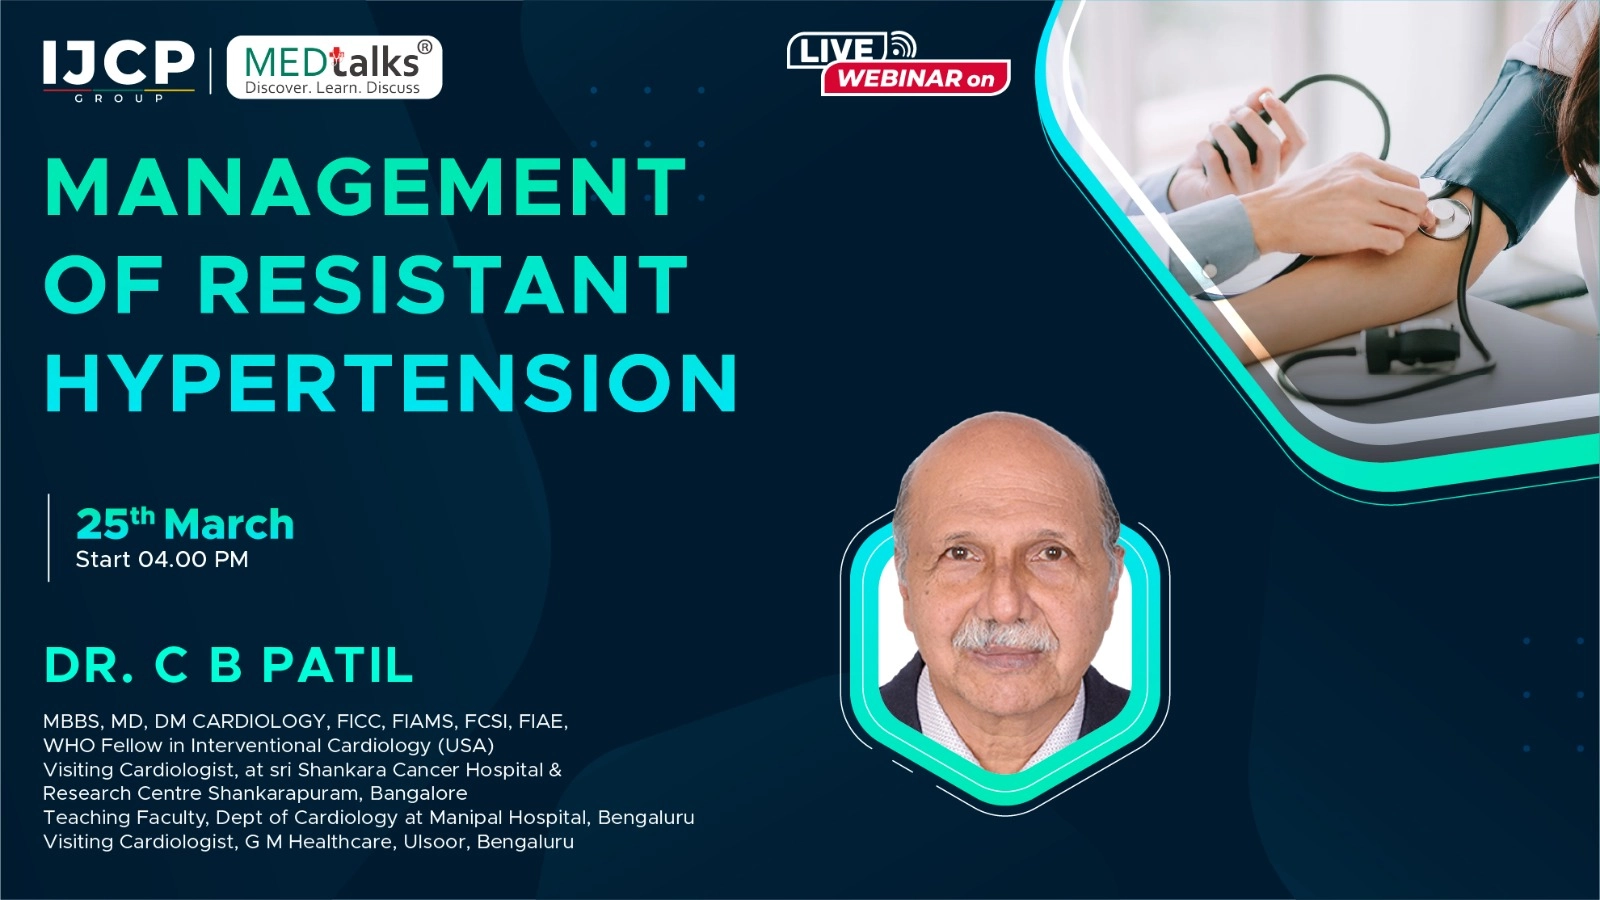 Management of Resistant Hypertension- A Knowledgeable Session